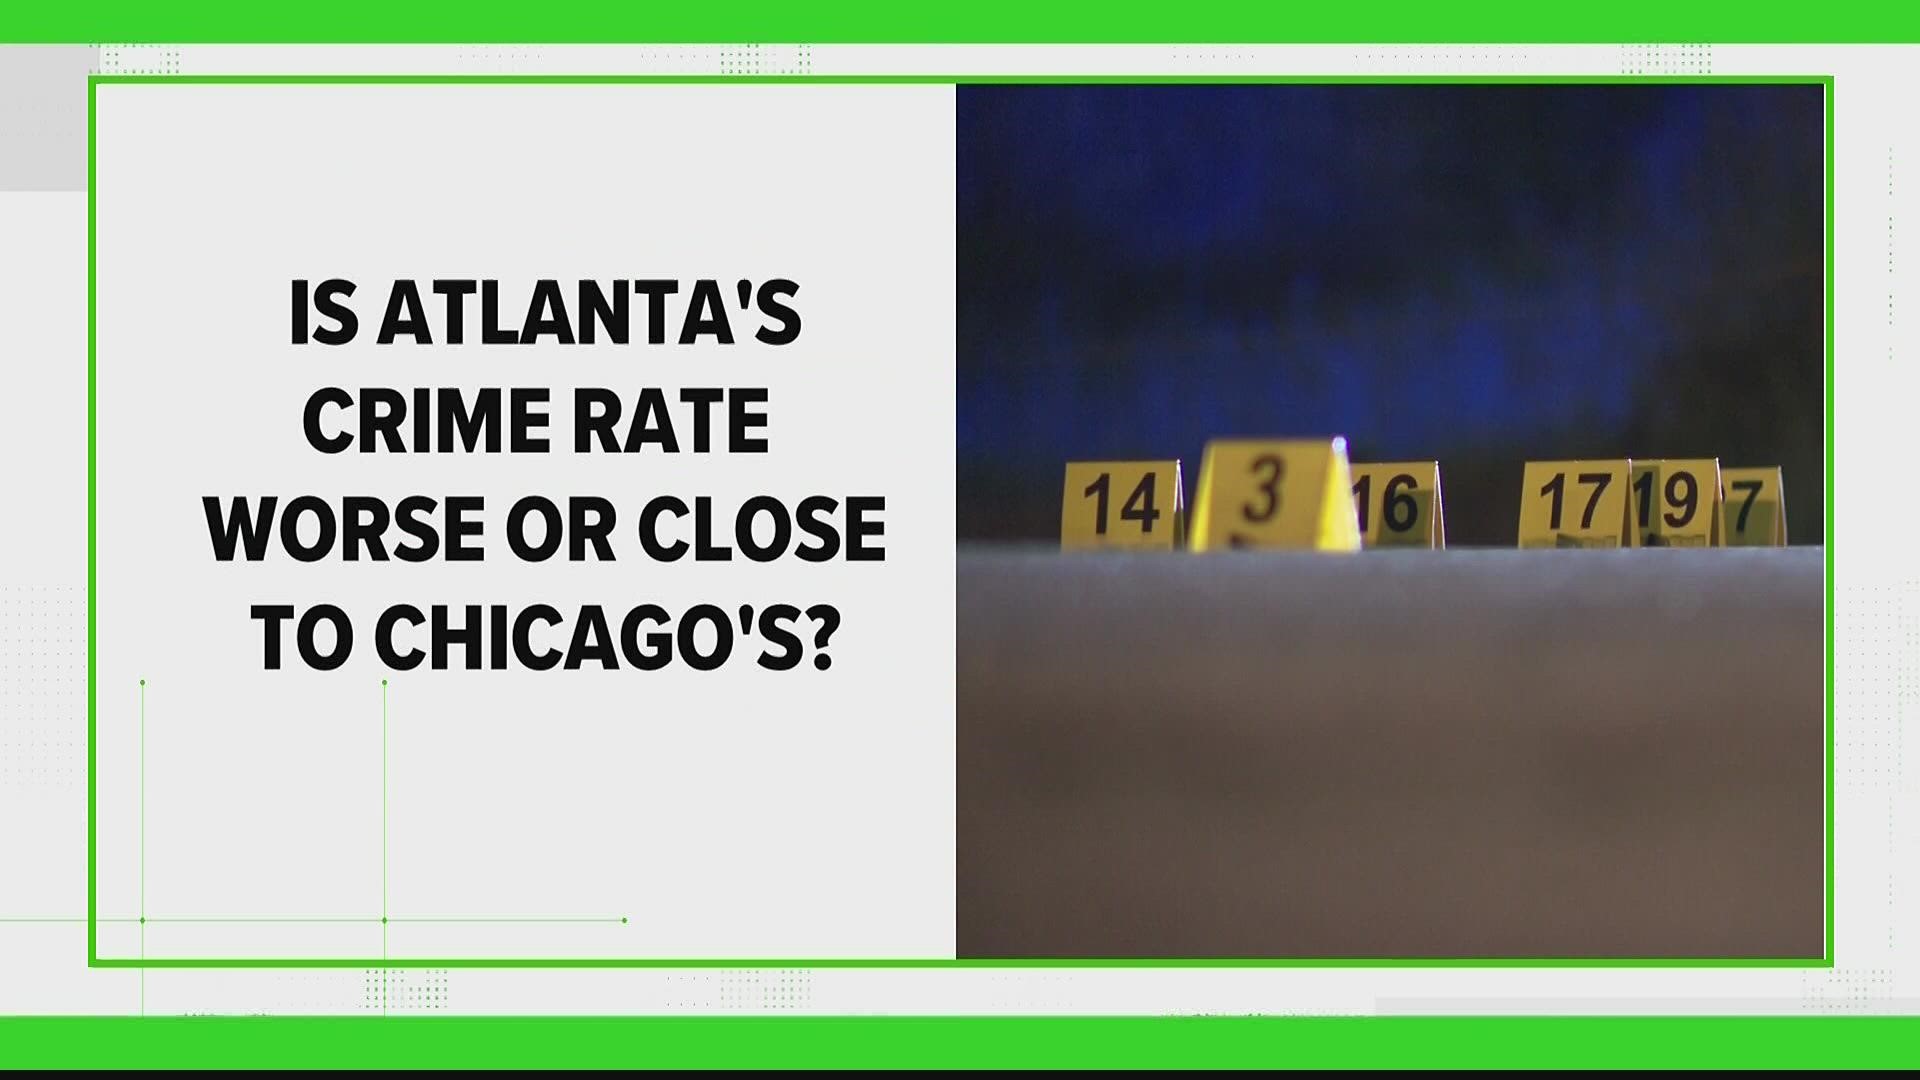 Even though Chicago is a larger city with more crime, per capita, the likelihood of being a victim of certain crimes is higher in Atlanta.